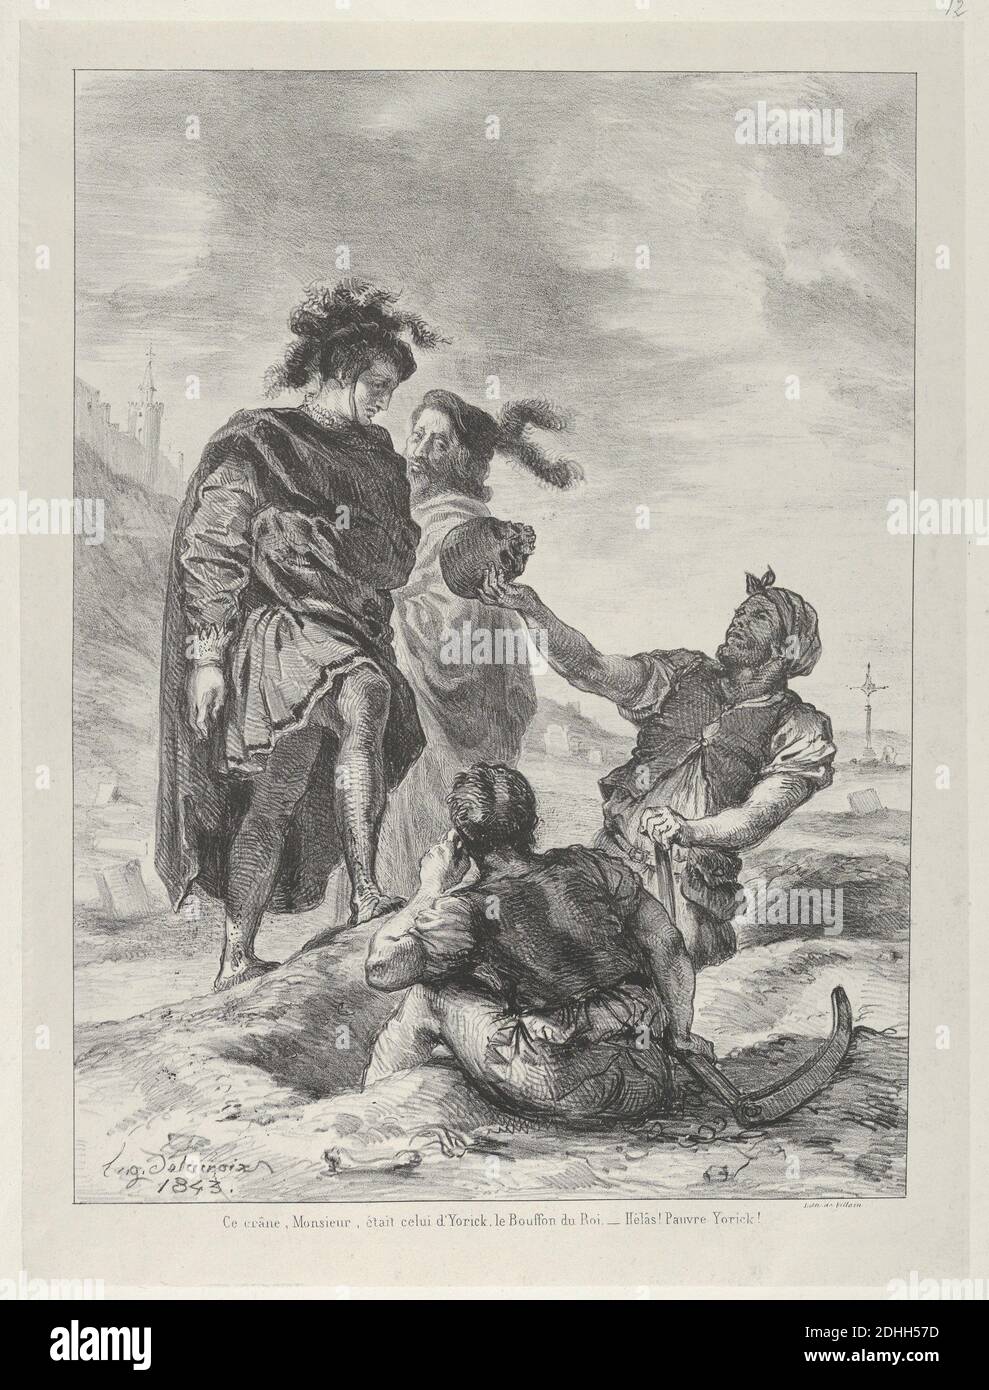 Eugène Delacroix (French, Charenton-Saint-Maurice 1798–1863 Paris) Hamlet and Horatio Before The Gravediggers (Hamlet,Act 5, Scene 1), 1843 French,  Lithograph; second state of four; Image: 11 1/4 x 8 1/4 in. (28.5 x 21 cm) Sheet: 12 1/2 x 9 5/16 in. (31.8 x 23.7 cm) The Metropolitan Museum of Art, New York, Rogers Fund, 1922 (22.56.16) http://www.metmuseum.org/Collections/search-the-collections/337347 Stock Photo